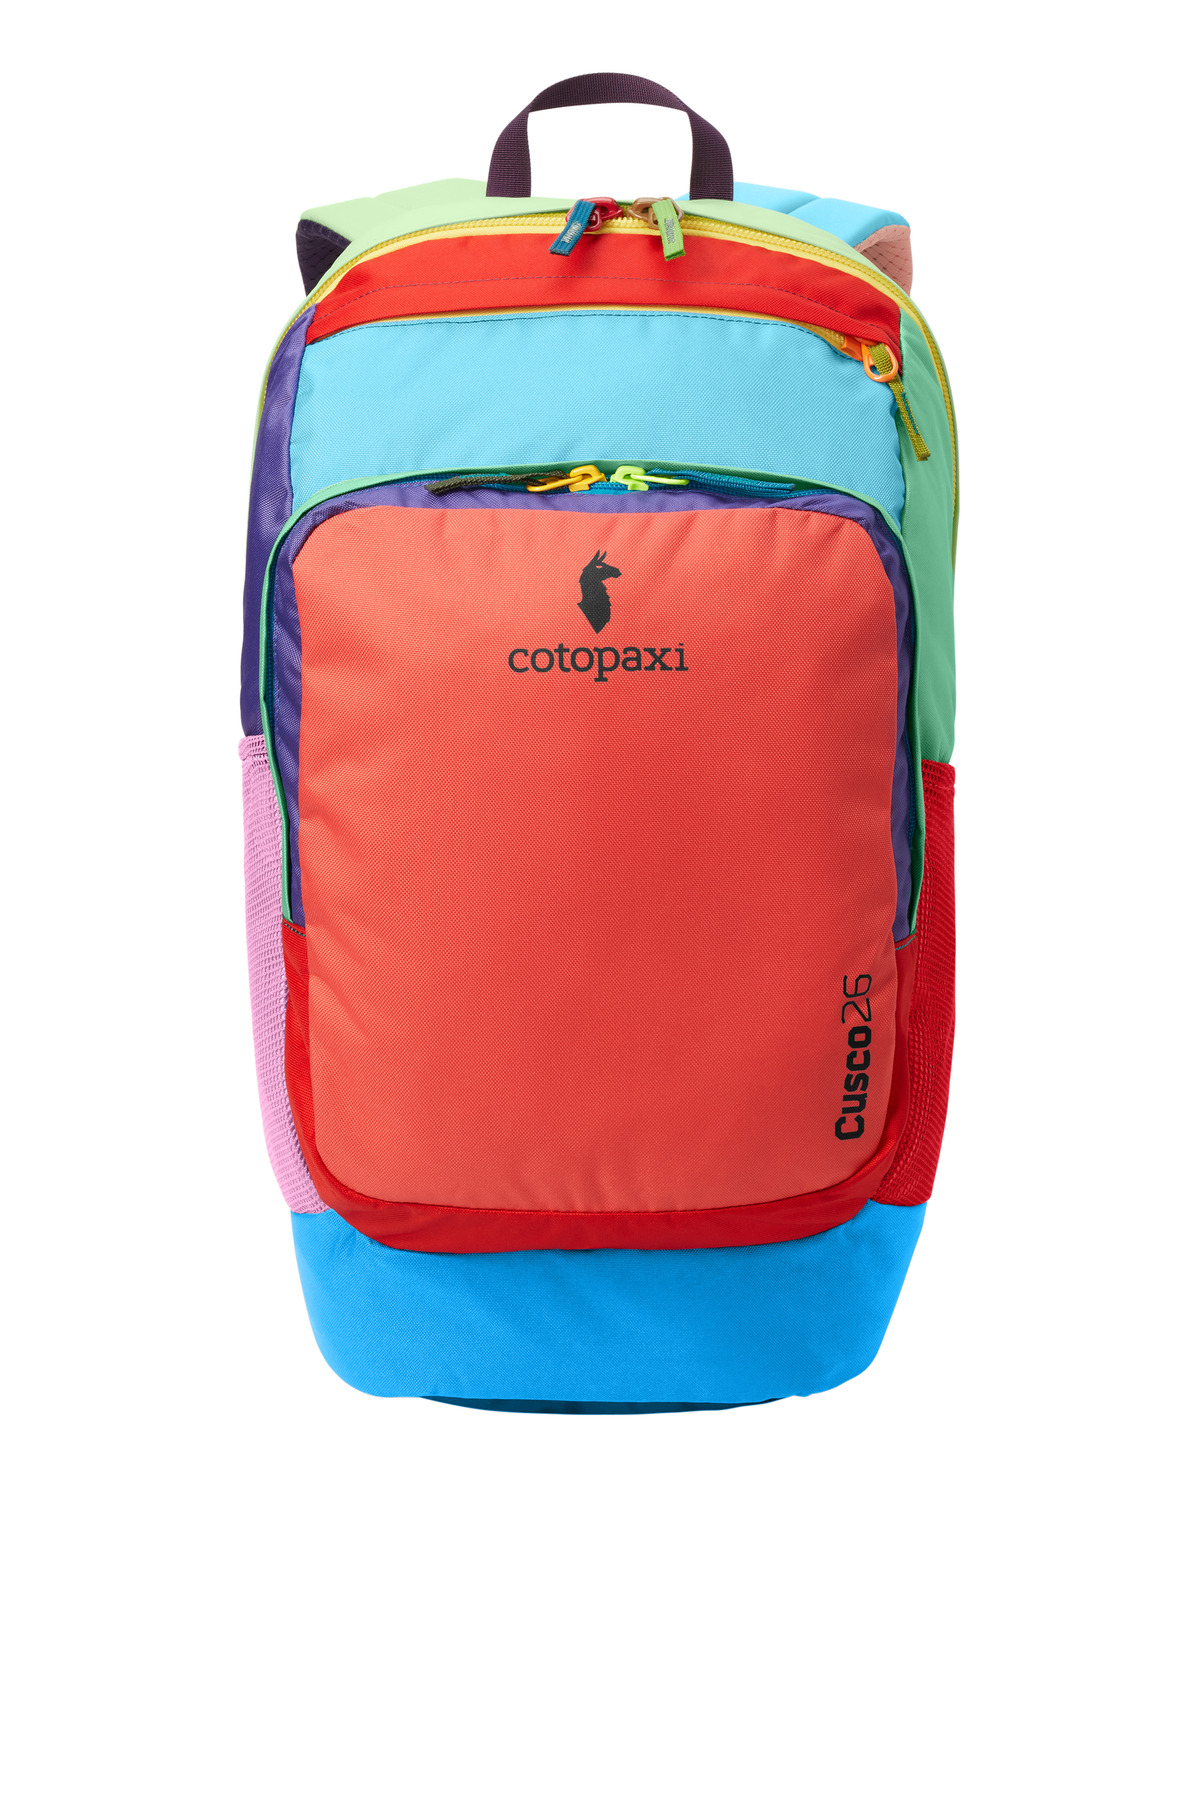 LIMITED EDITION Cotopaxi Cusco 26L Backpack-